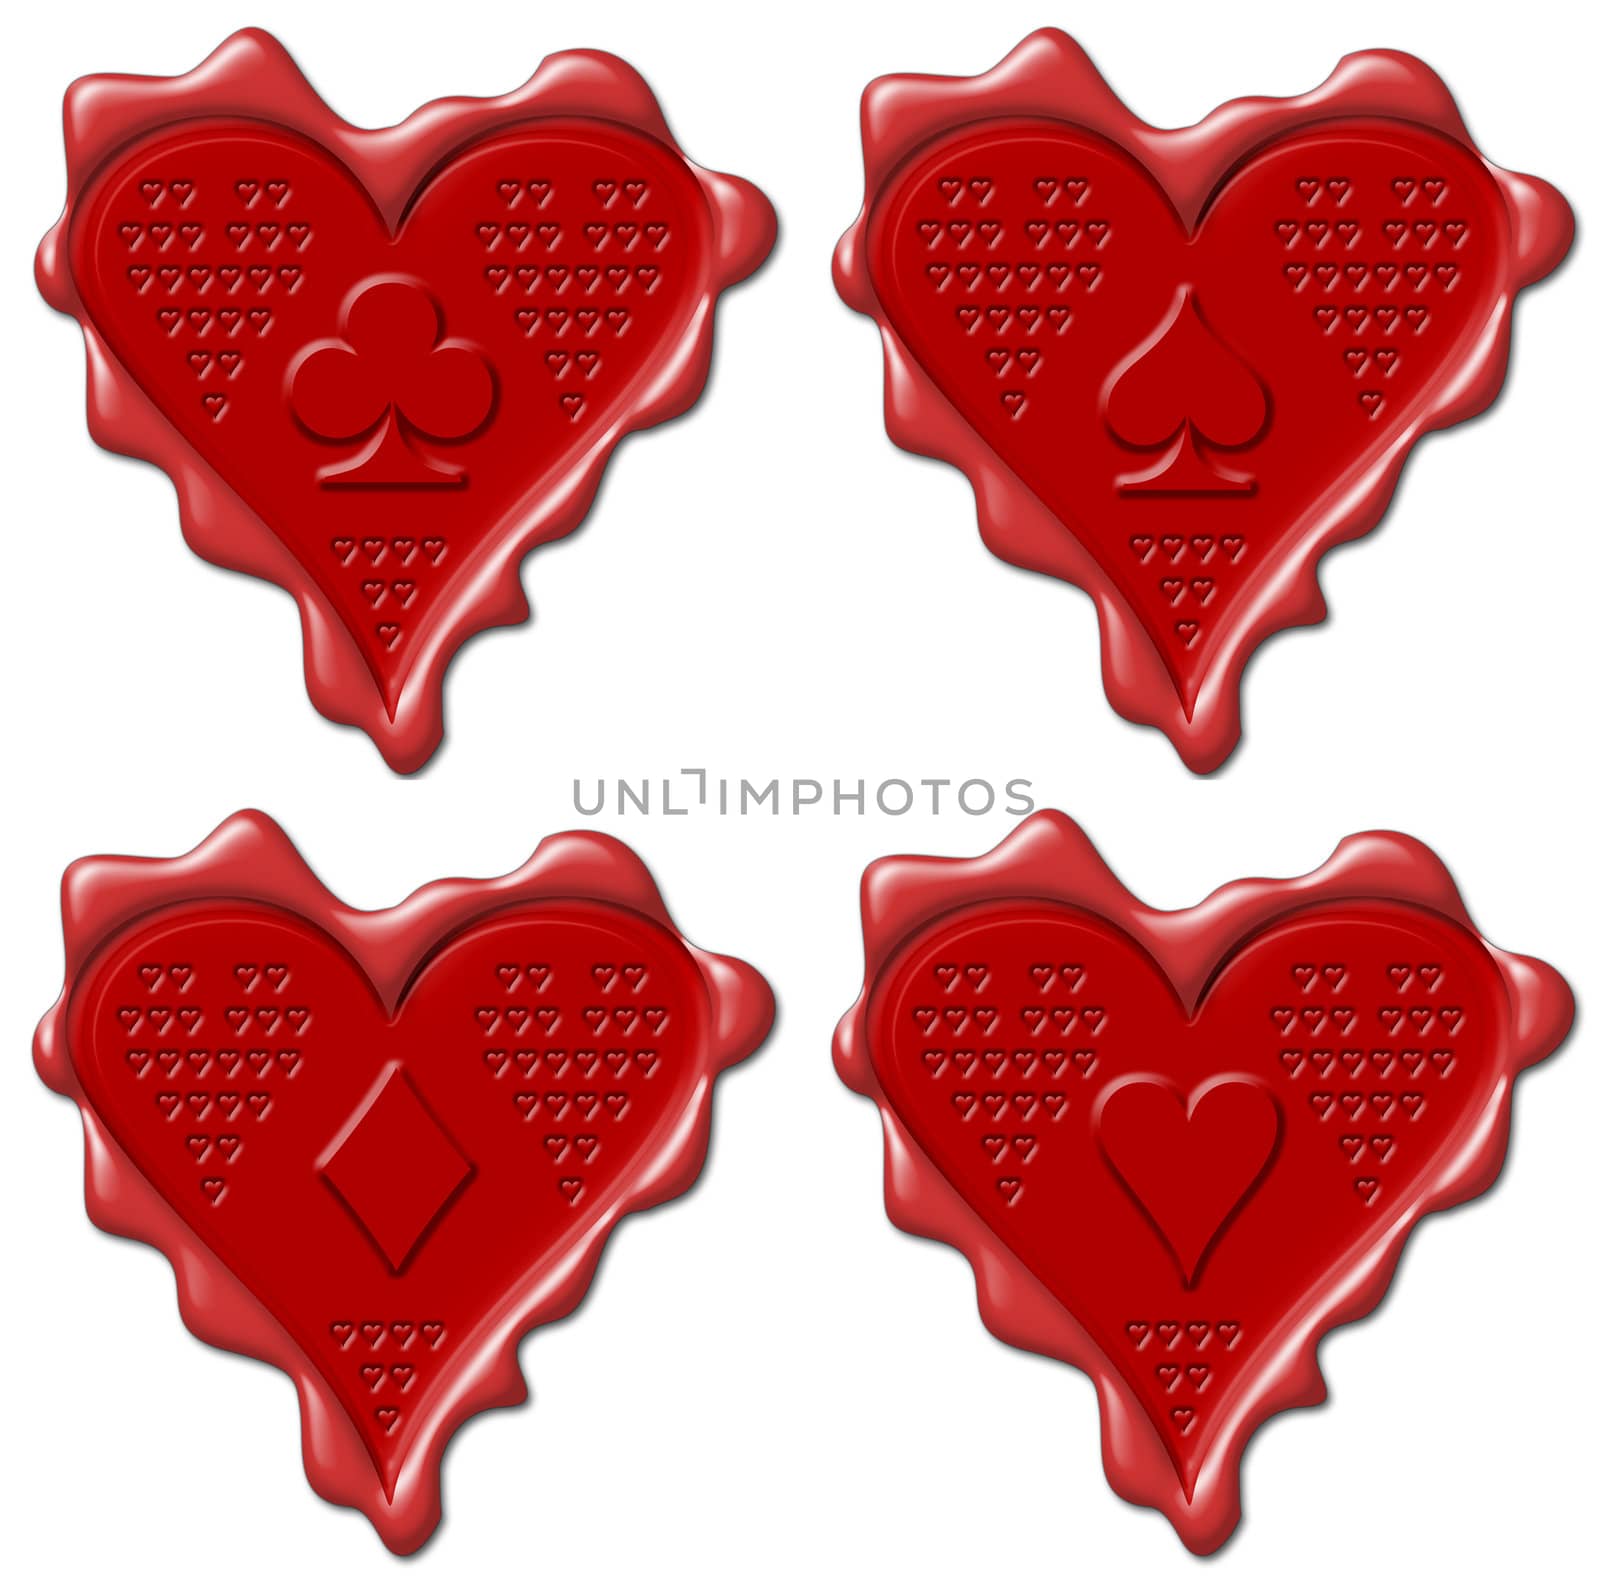 Heart - red wax seal collection by mozzyb